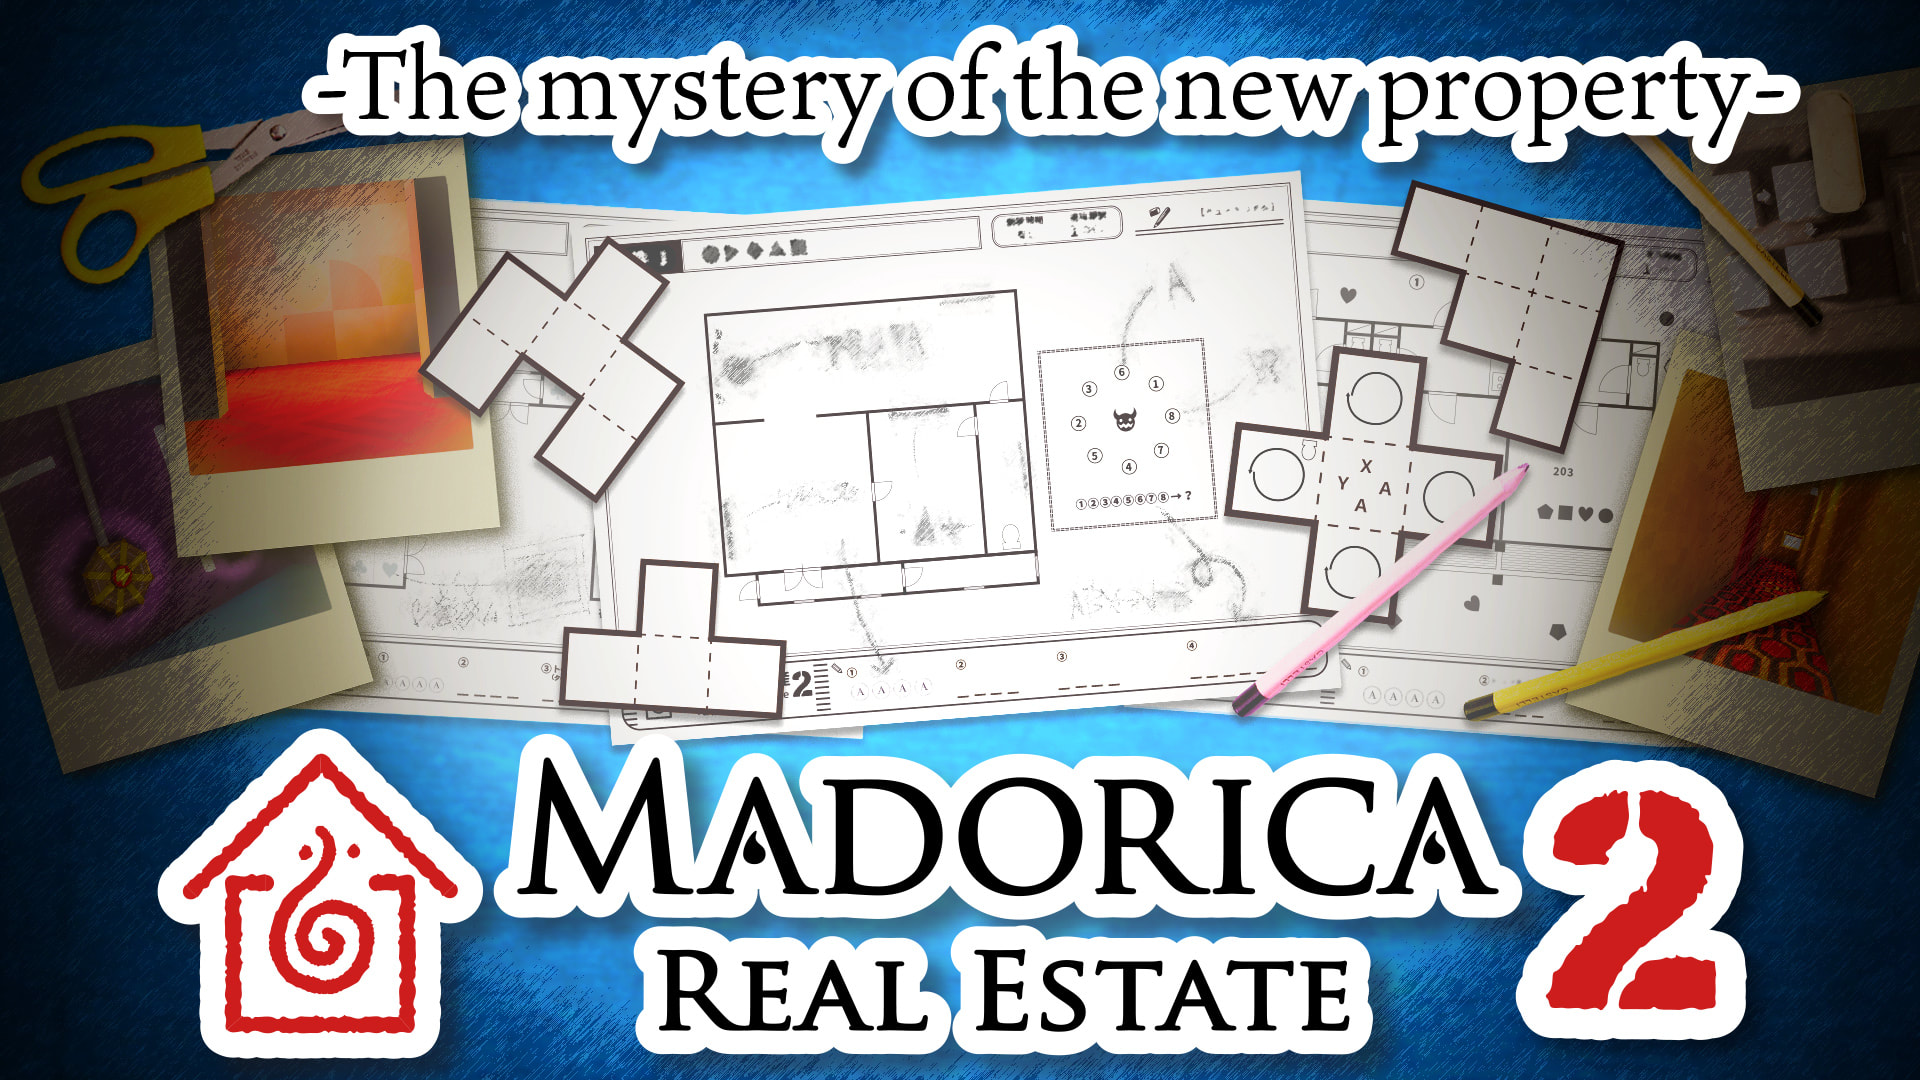 Madorica Real Estate 2 -The mystery of the new property-